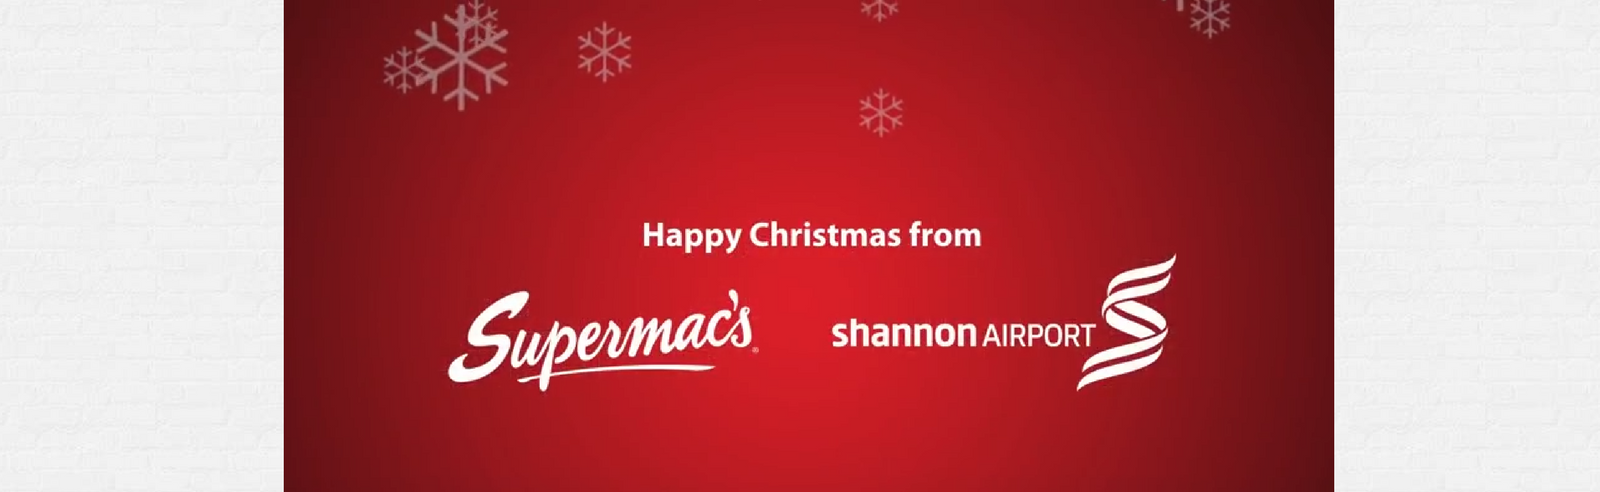 Throwback Shannon Airport Christmas 2016